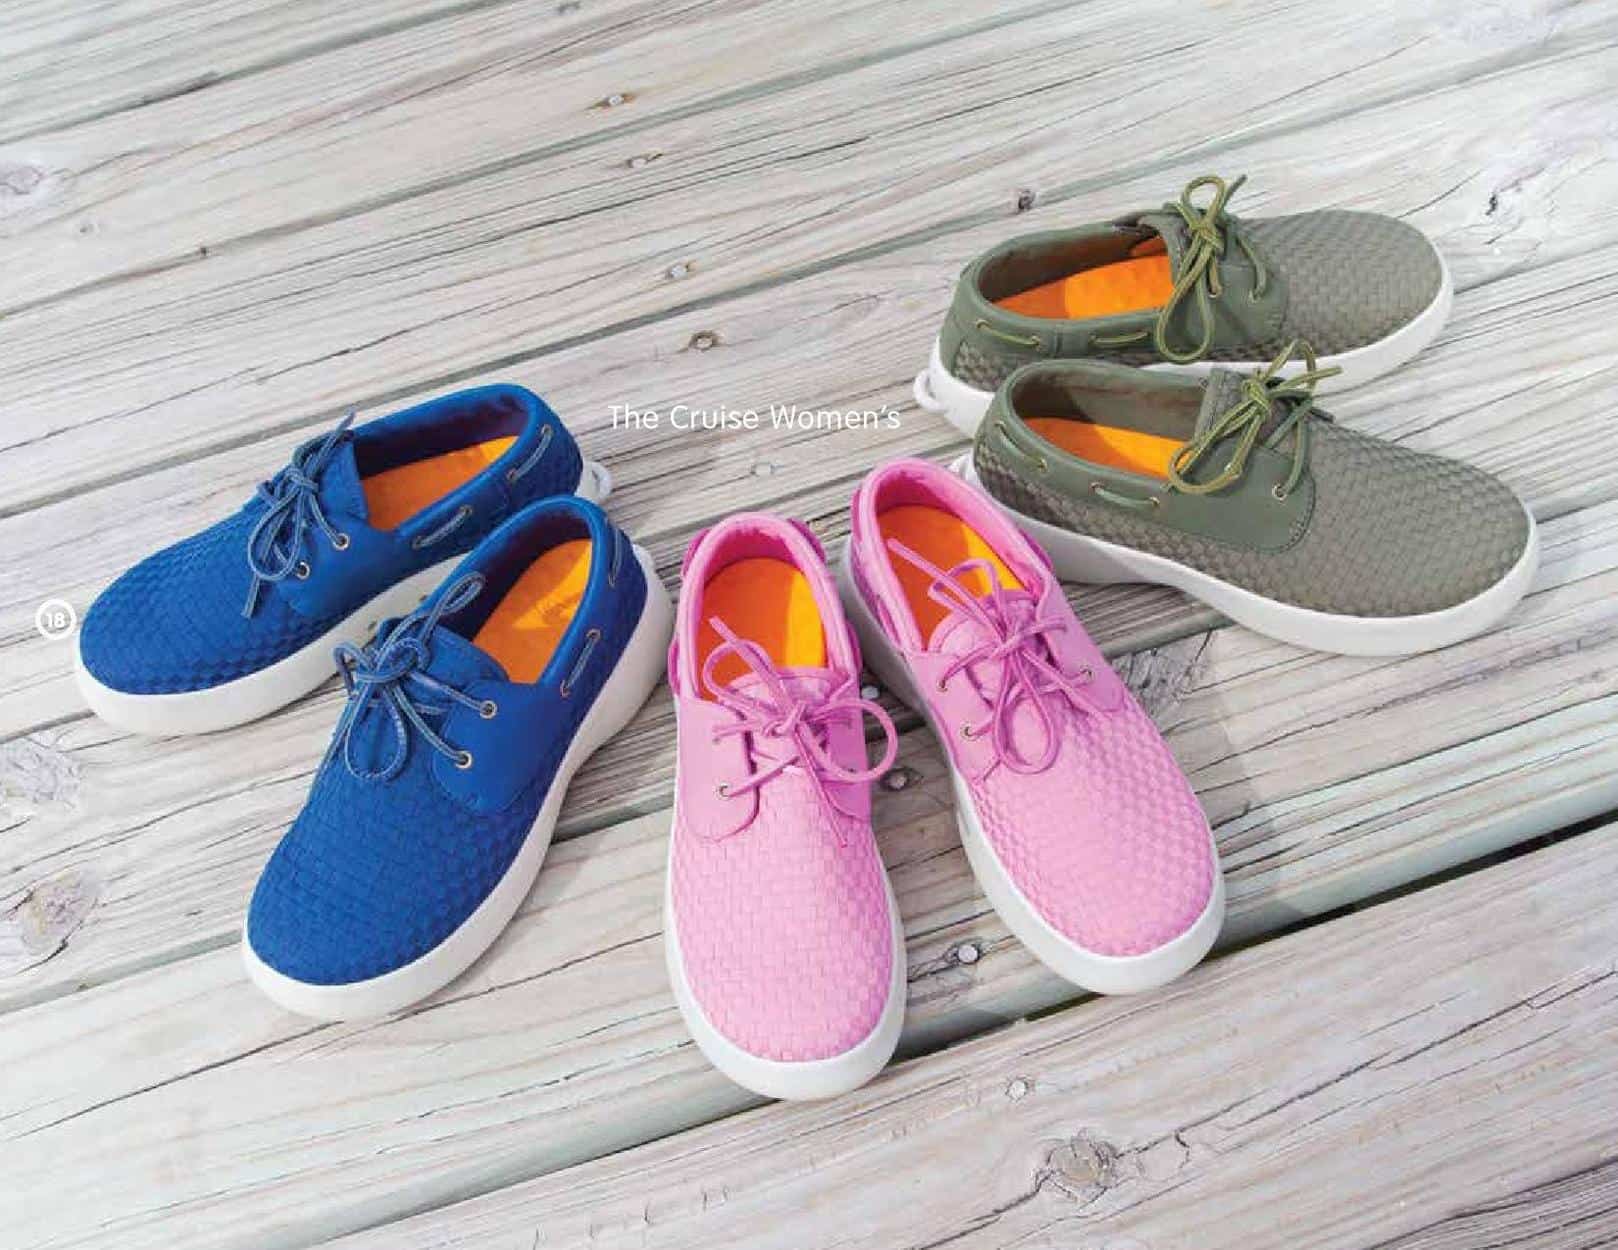 SoftScience - reinventing footwear comfort - slip-on - boat shoes - fishing shoes (3)